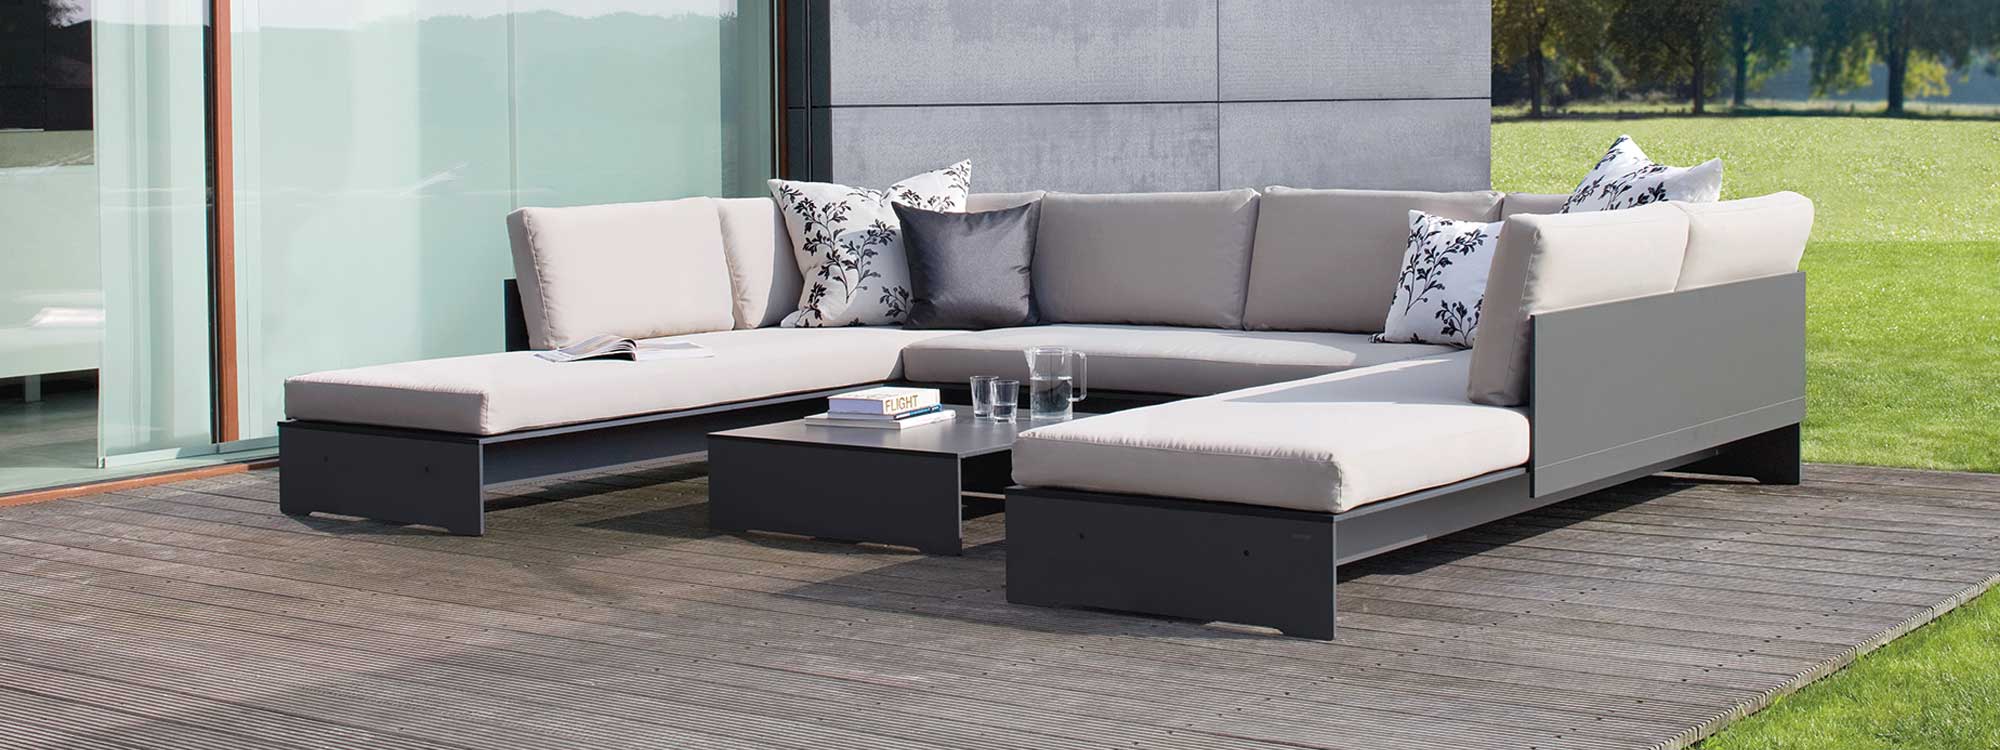 Image of Conmoto Riva low maintenance garden sofa in anthracite coloured HPL and light-grey cushions